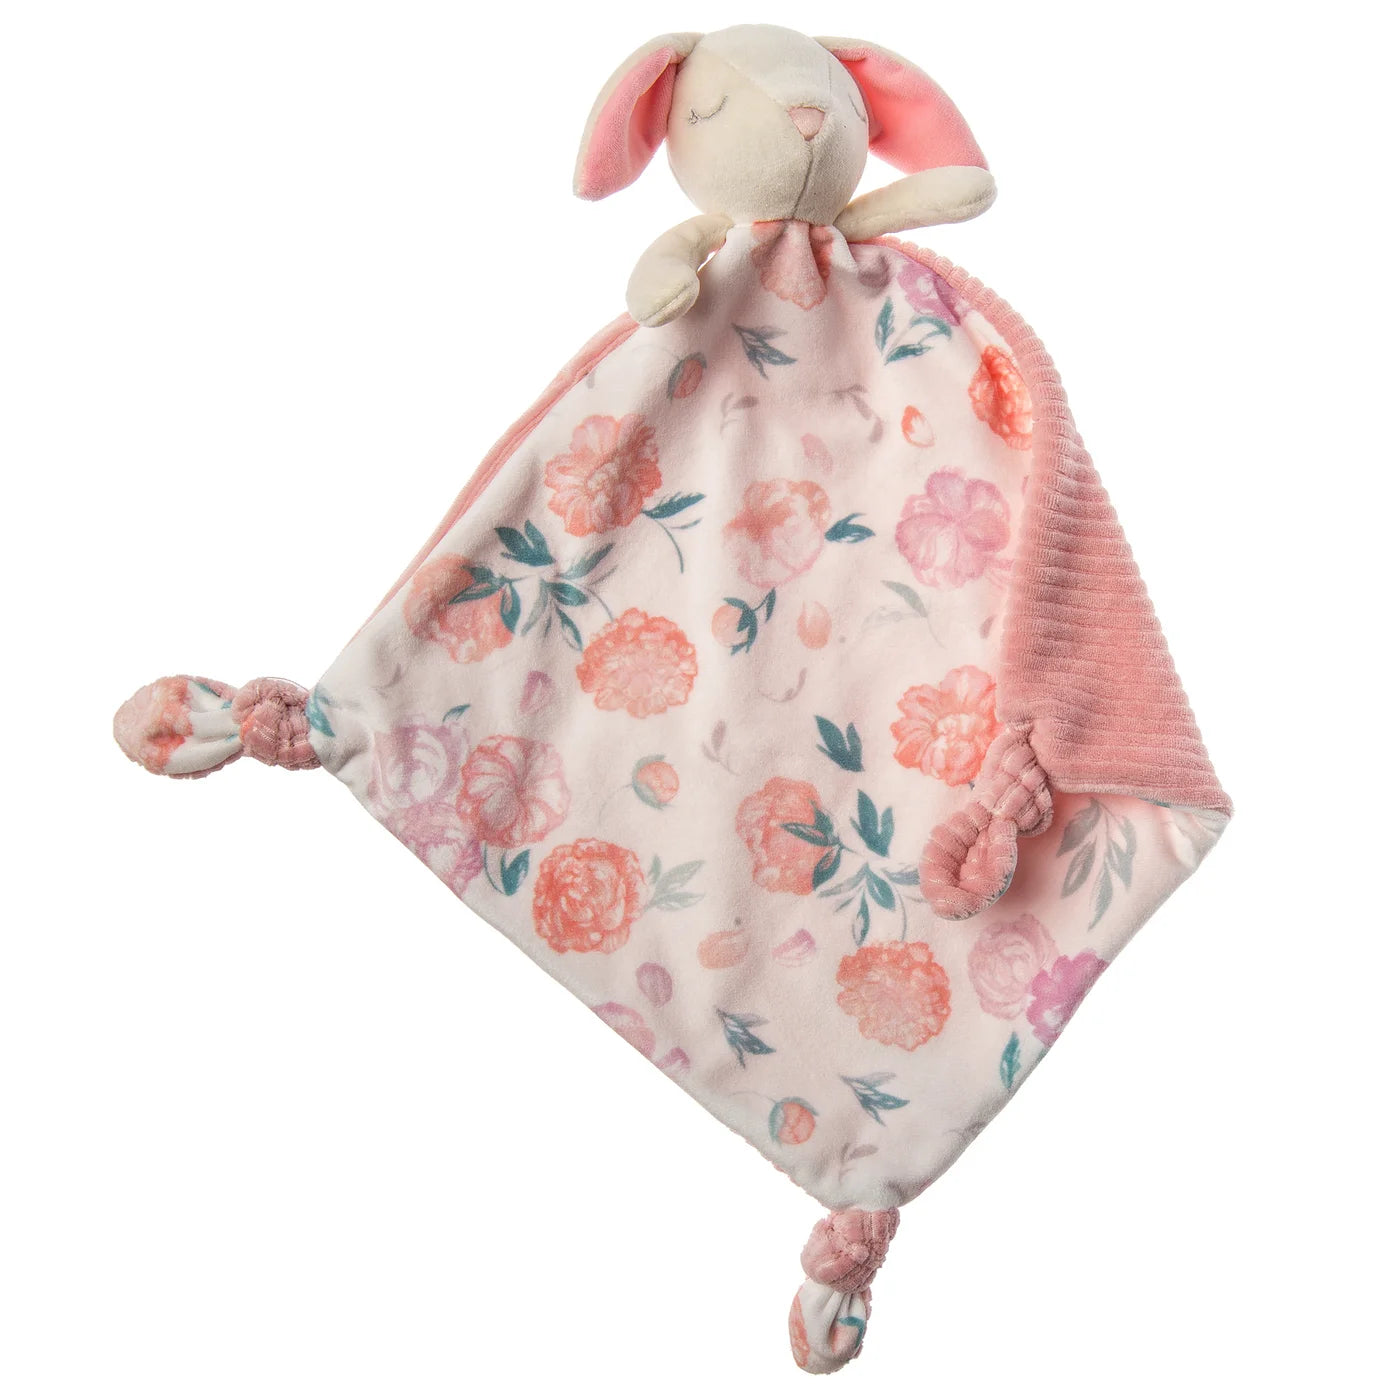 Baby Lovey - Floral Bunny